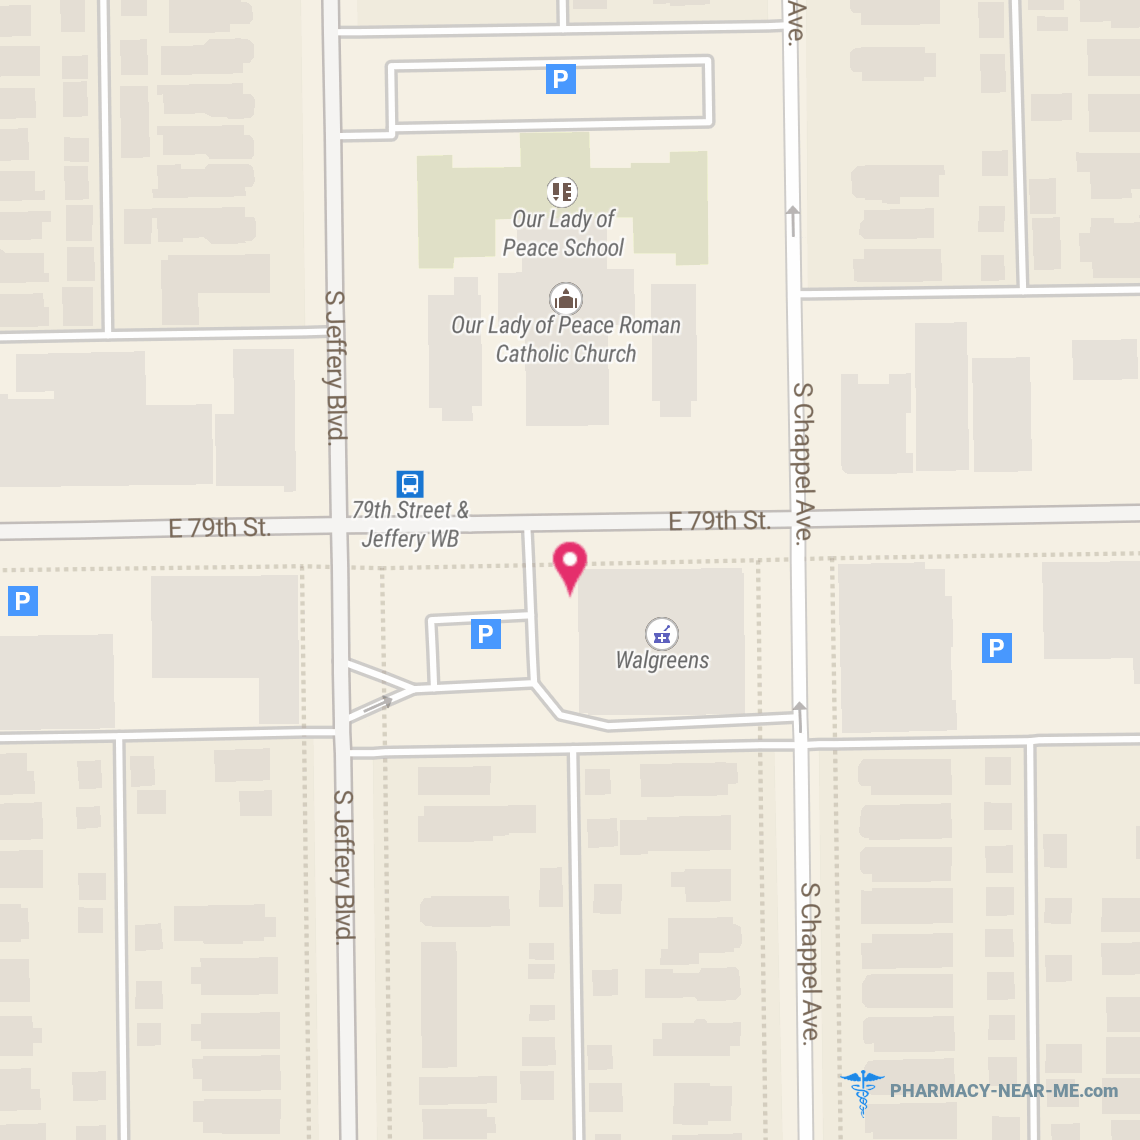 WALGREENS #05033 - Pharmacy Hours, Phone, Reviews & Information: 2015 E 79th St, Chicago, Illinois 60617, United States